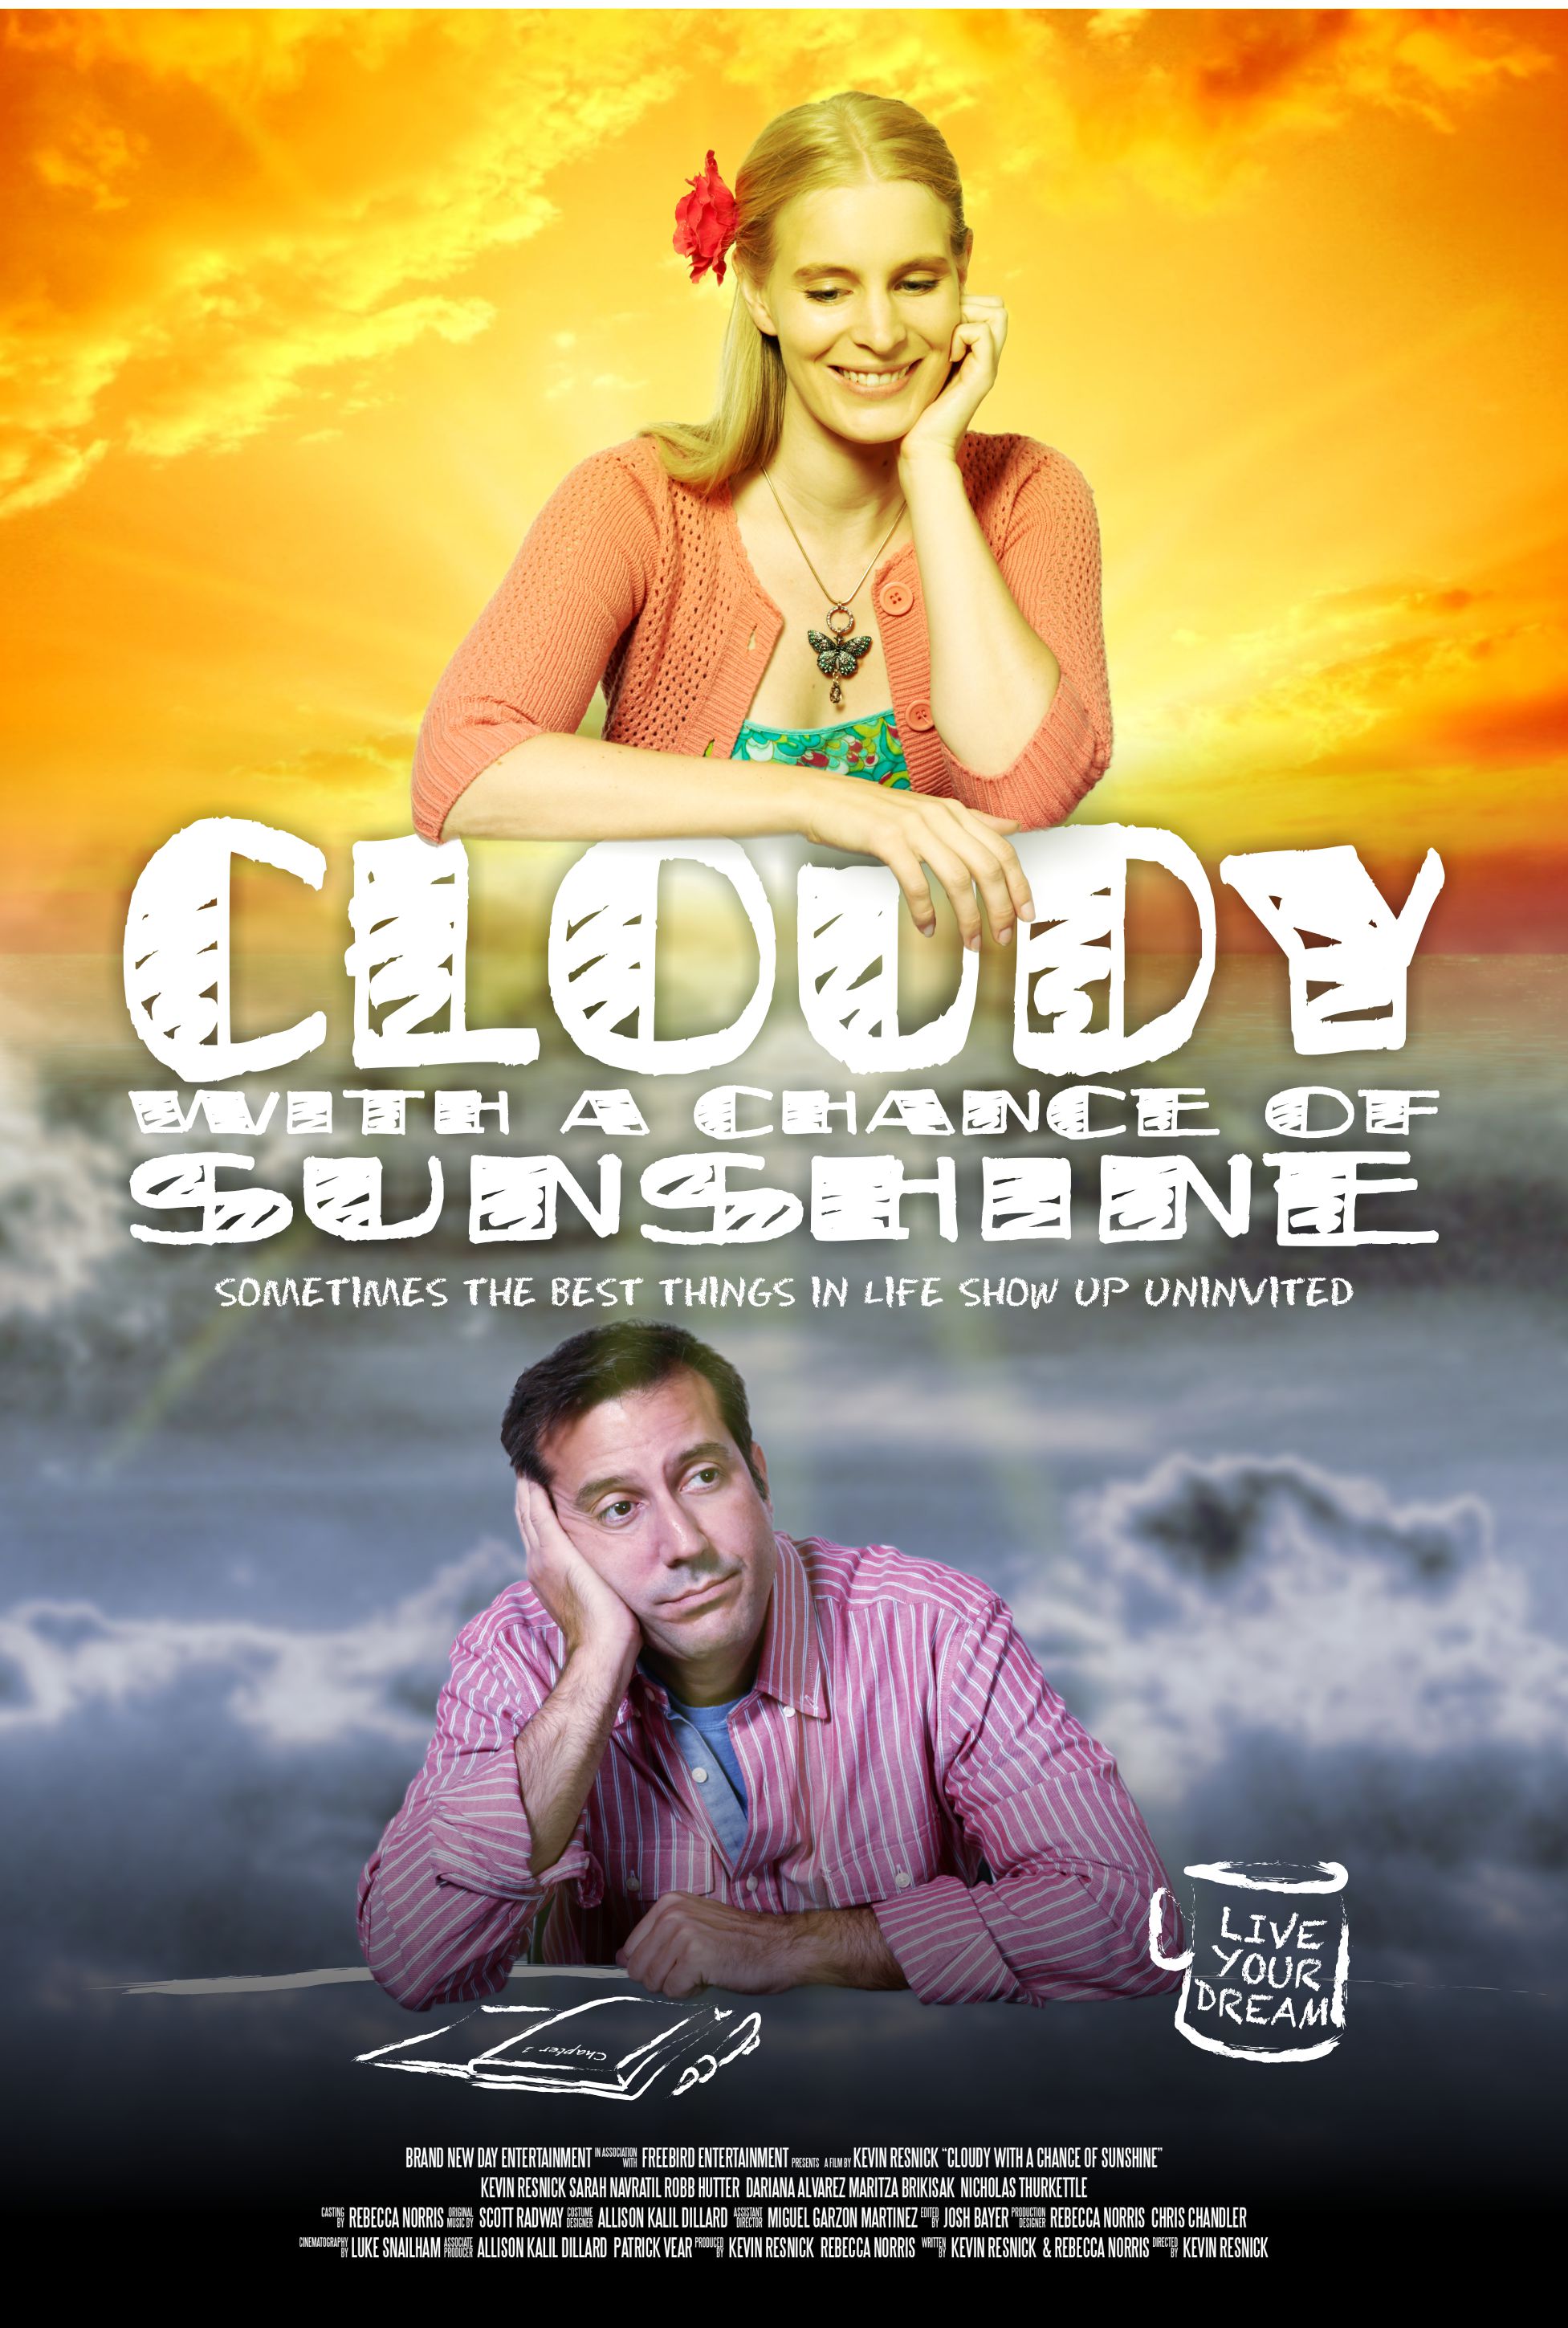 Cloudy with a Chance of Sunshine